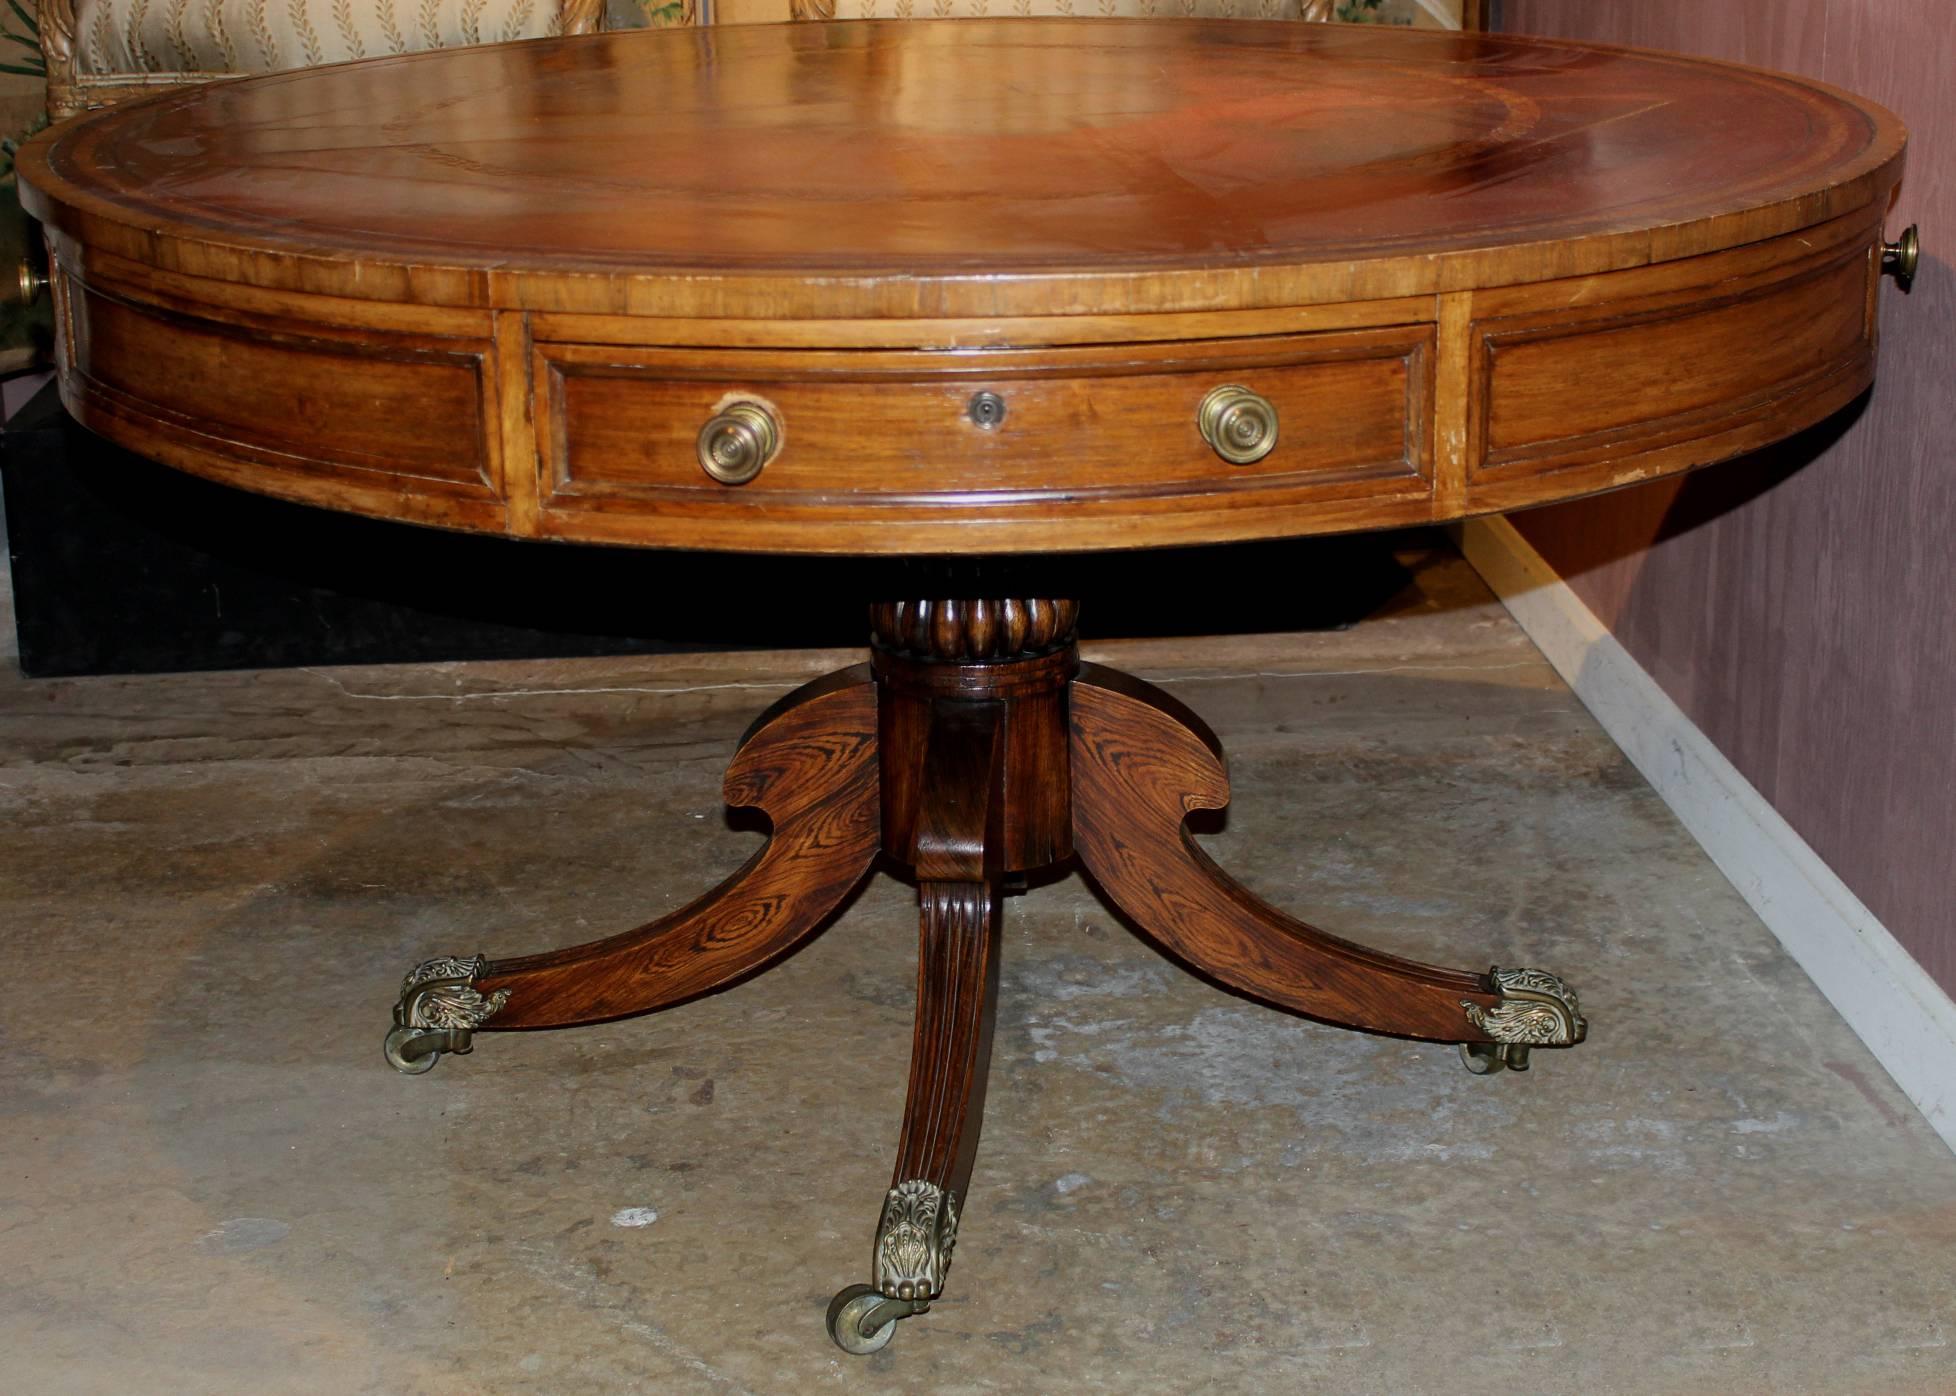 A large Regency drum table in rosewood of exceptional quality. Original brasses on four drawers with fine quality original brass casters. The top crossbanded with Rosewood and the drawers with applied Rosewood banding. The red leather top with